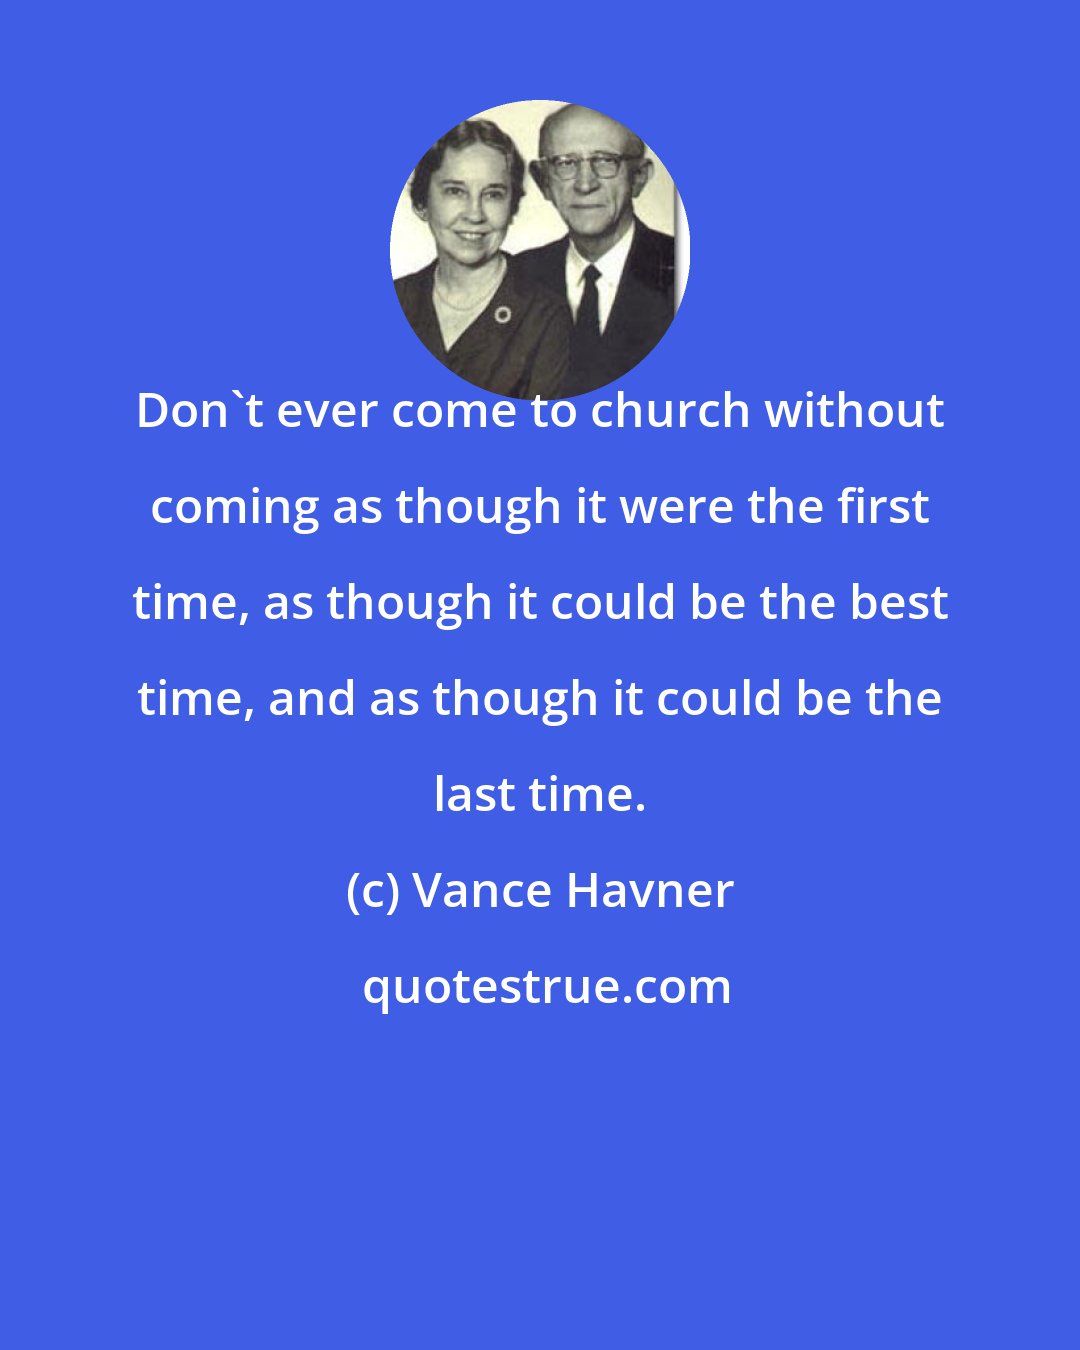 Vance Havner: Don't ever come to church without coming as though it were the first time, as though it could be the best time, and as though it could be the last time.